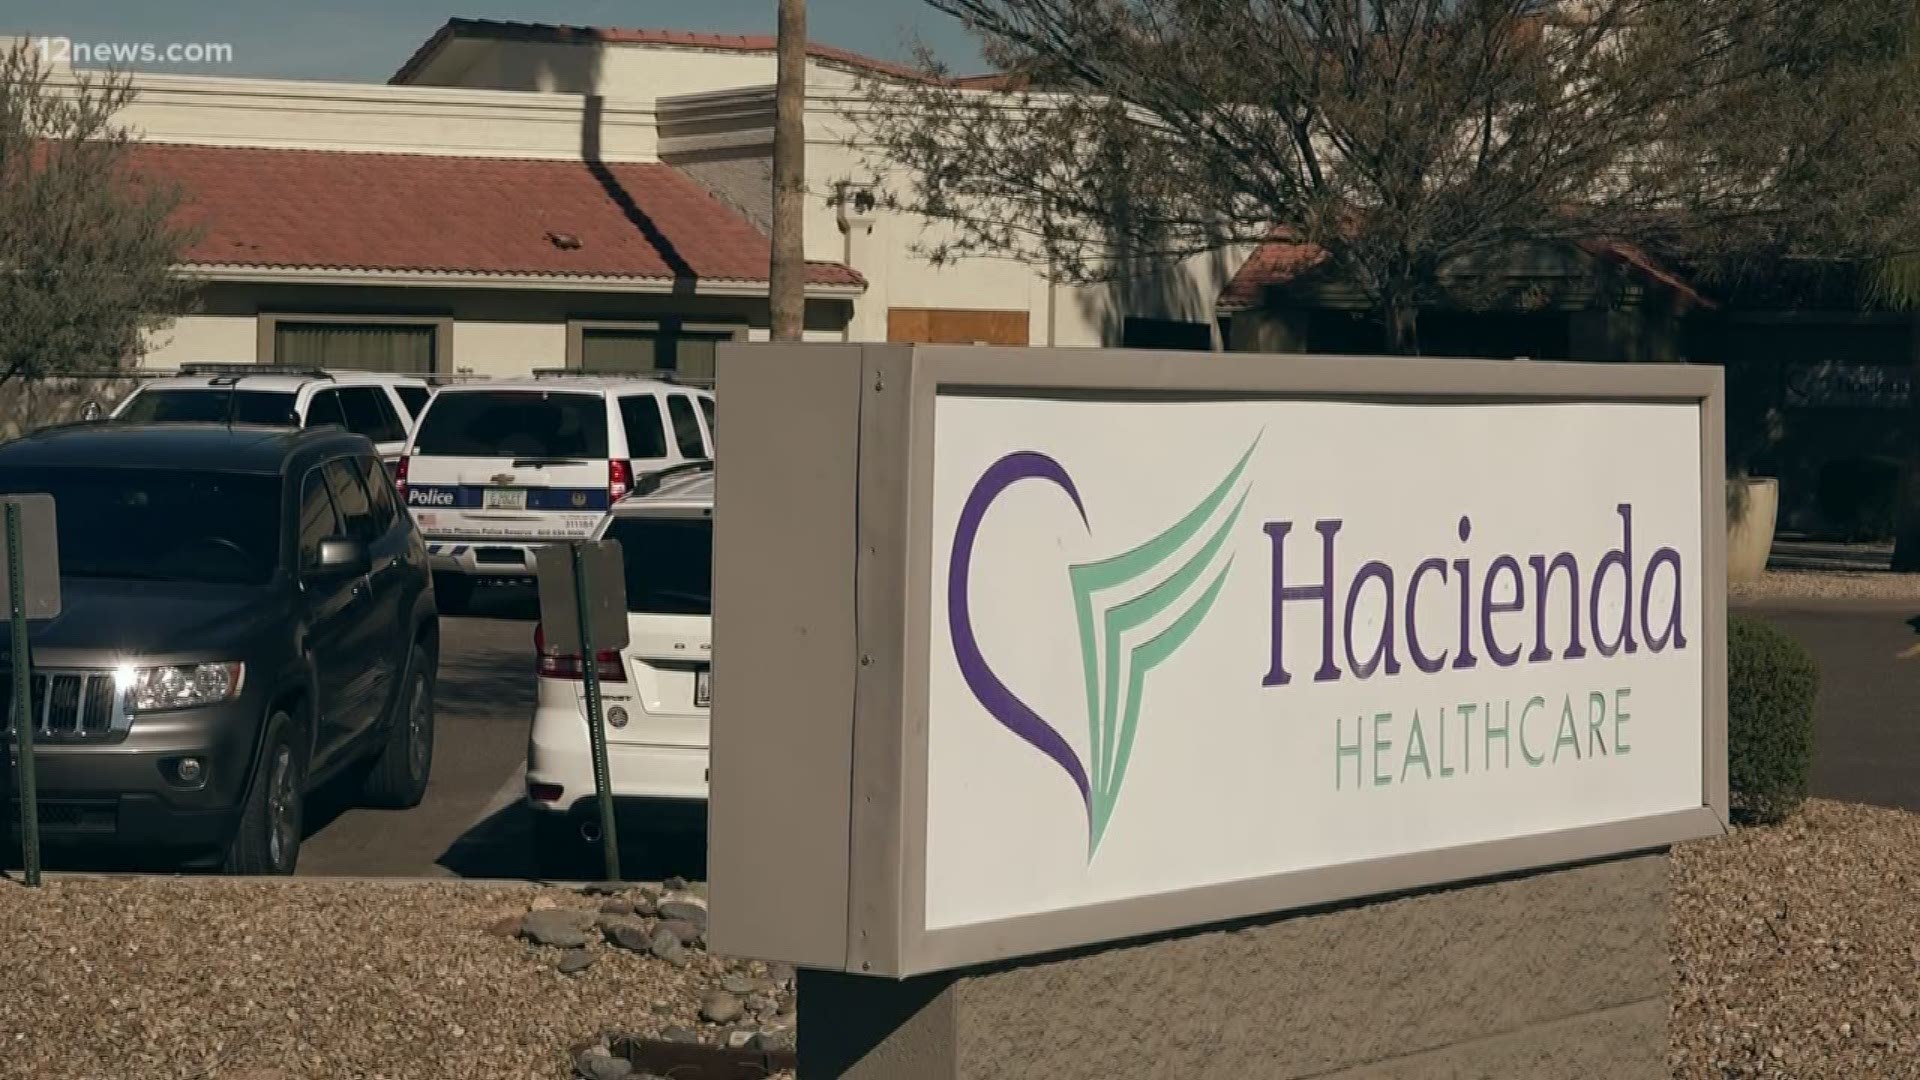 The 911 call made from Hacienda Healthcare moments after a woman in a vegetative state at the facility gave birth has been released. On the tape, you can hear shock and surprise in the voices of the woman's caretakers.